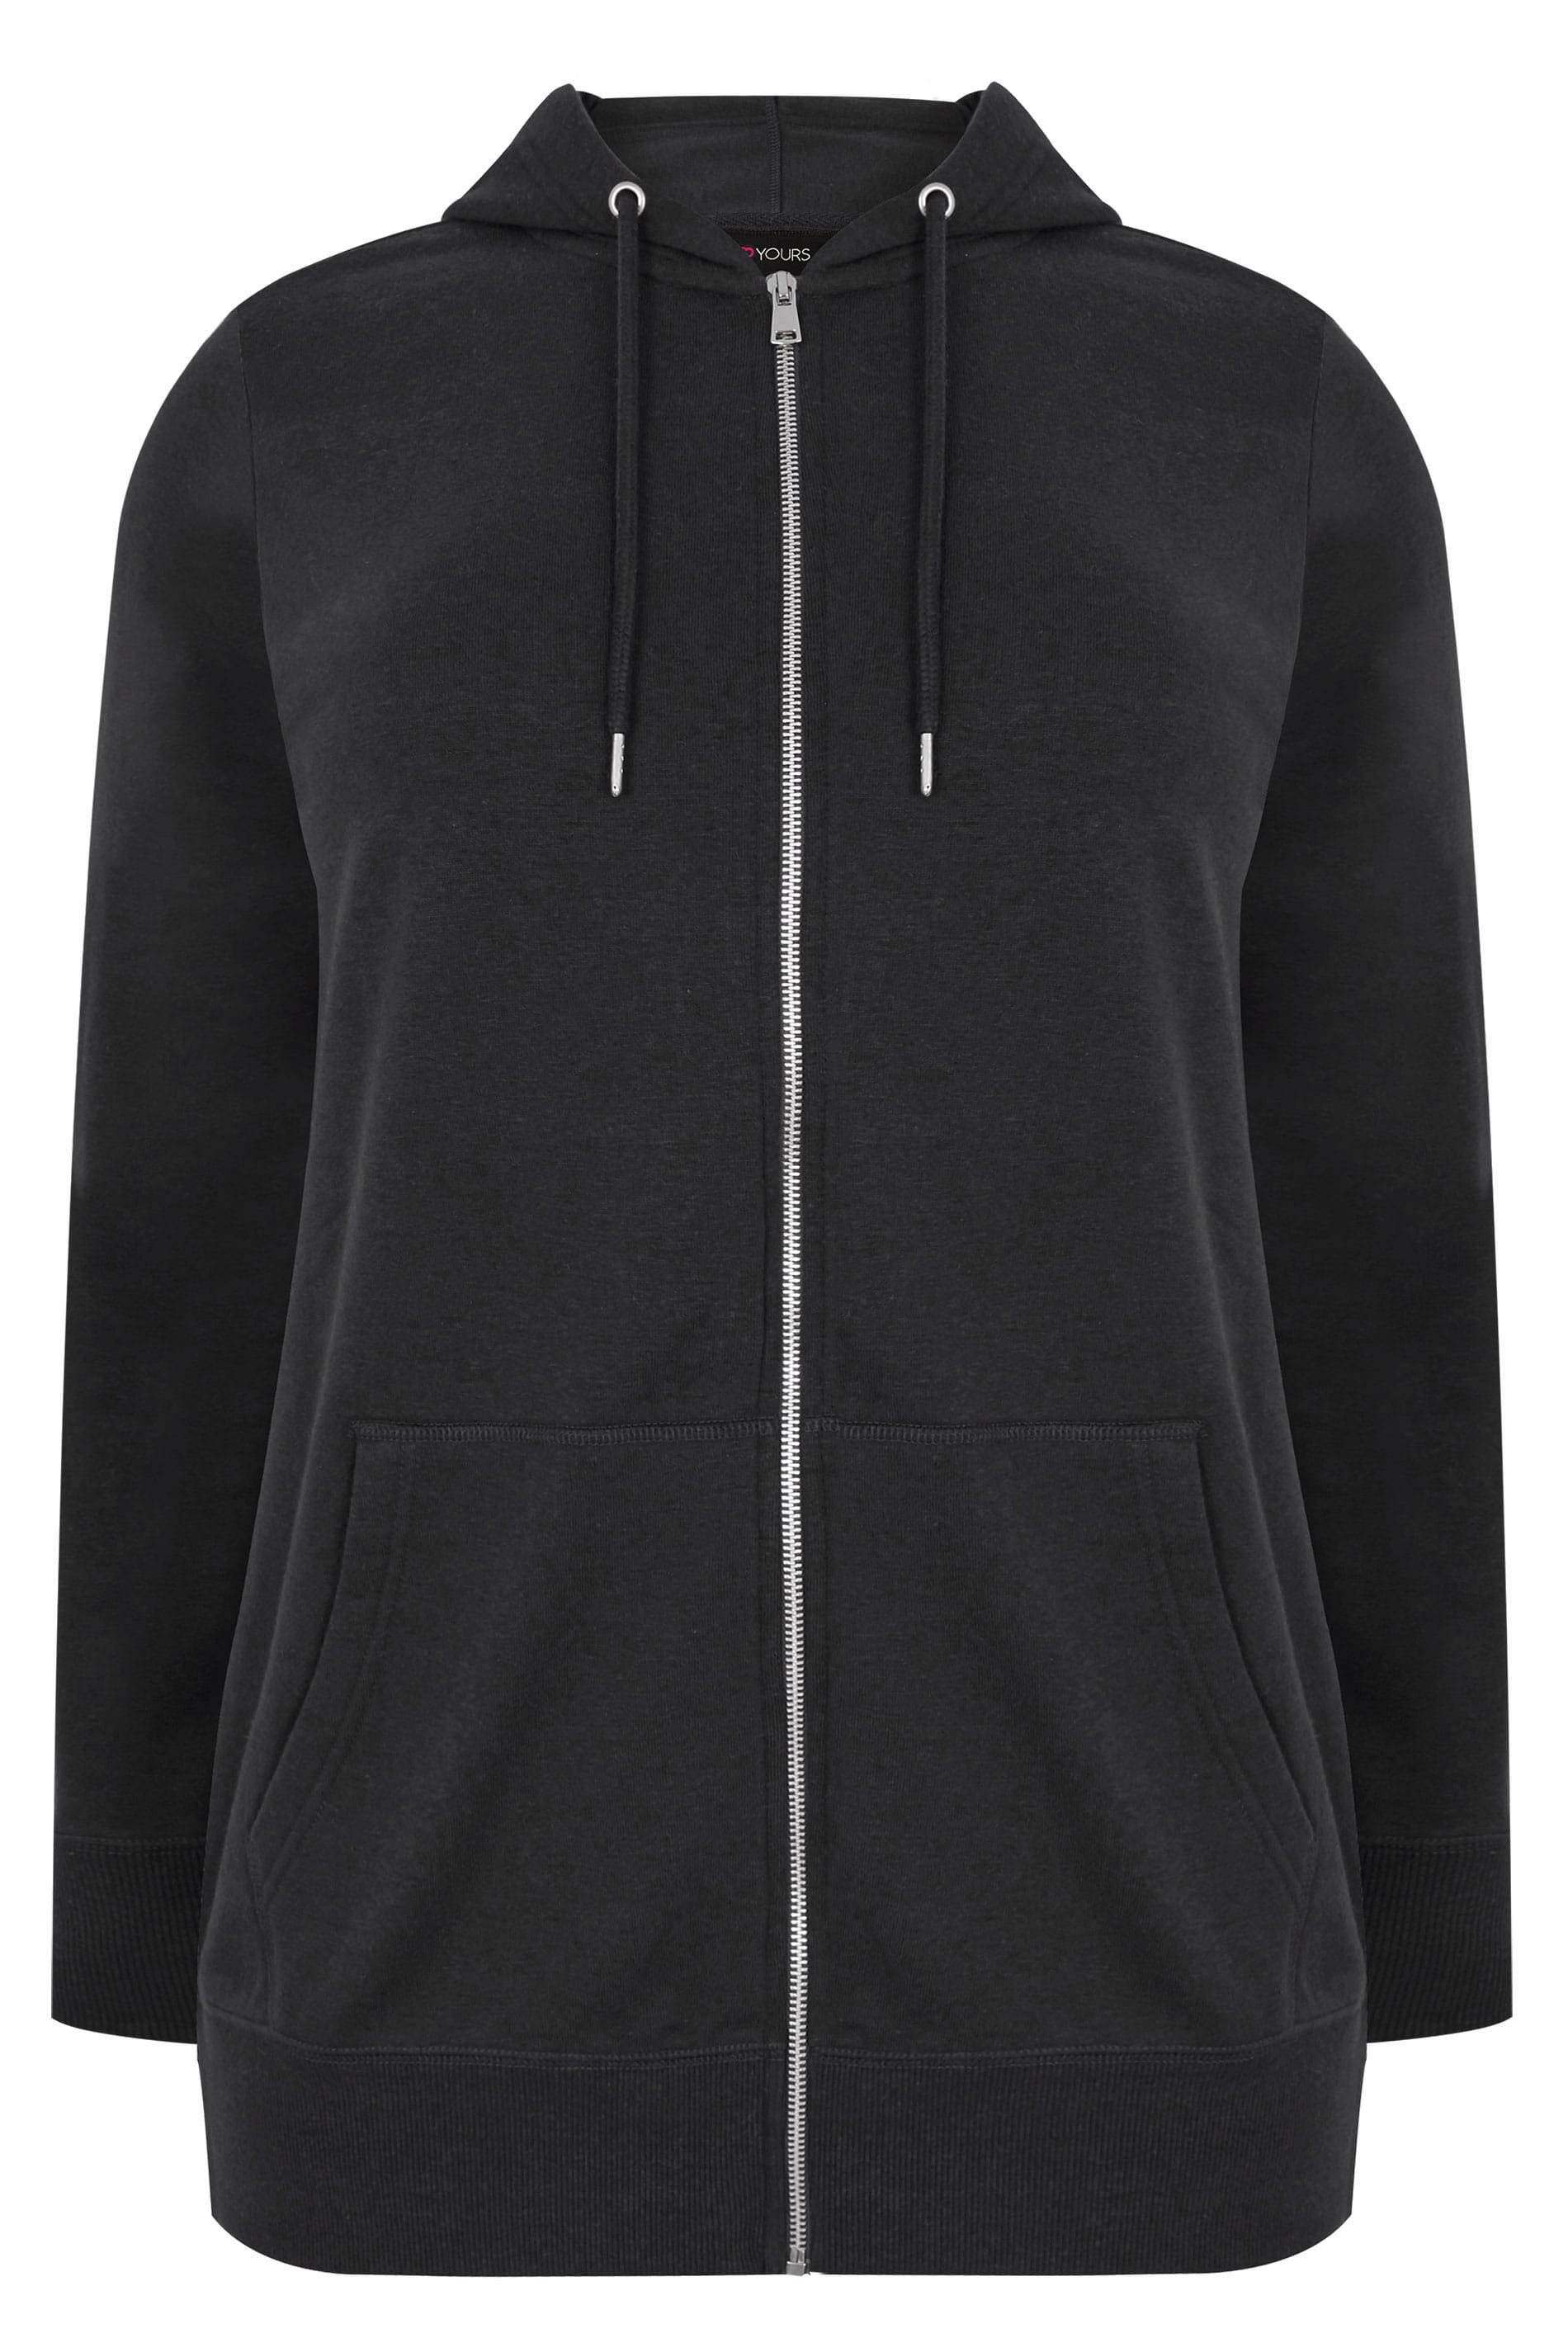 Black Zip Through Hoodie, Plus size 16 to 36 | Yours Clothing